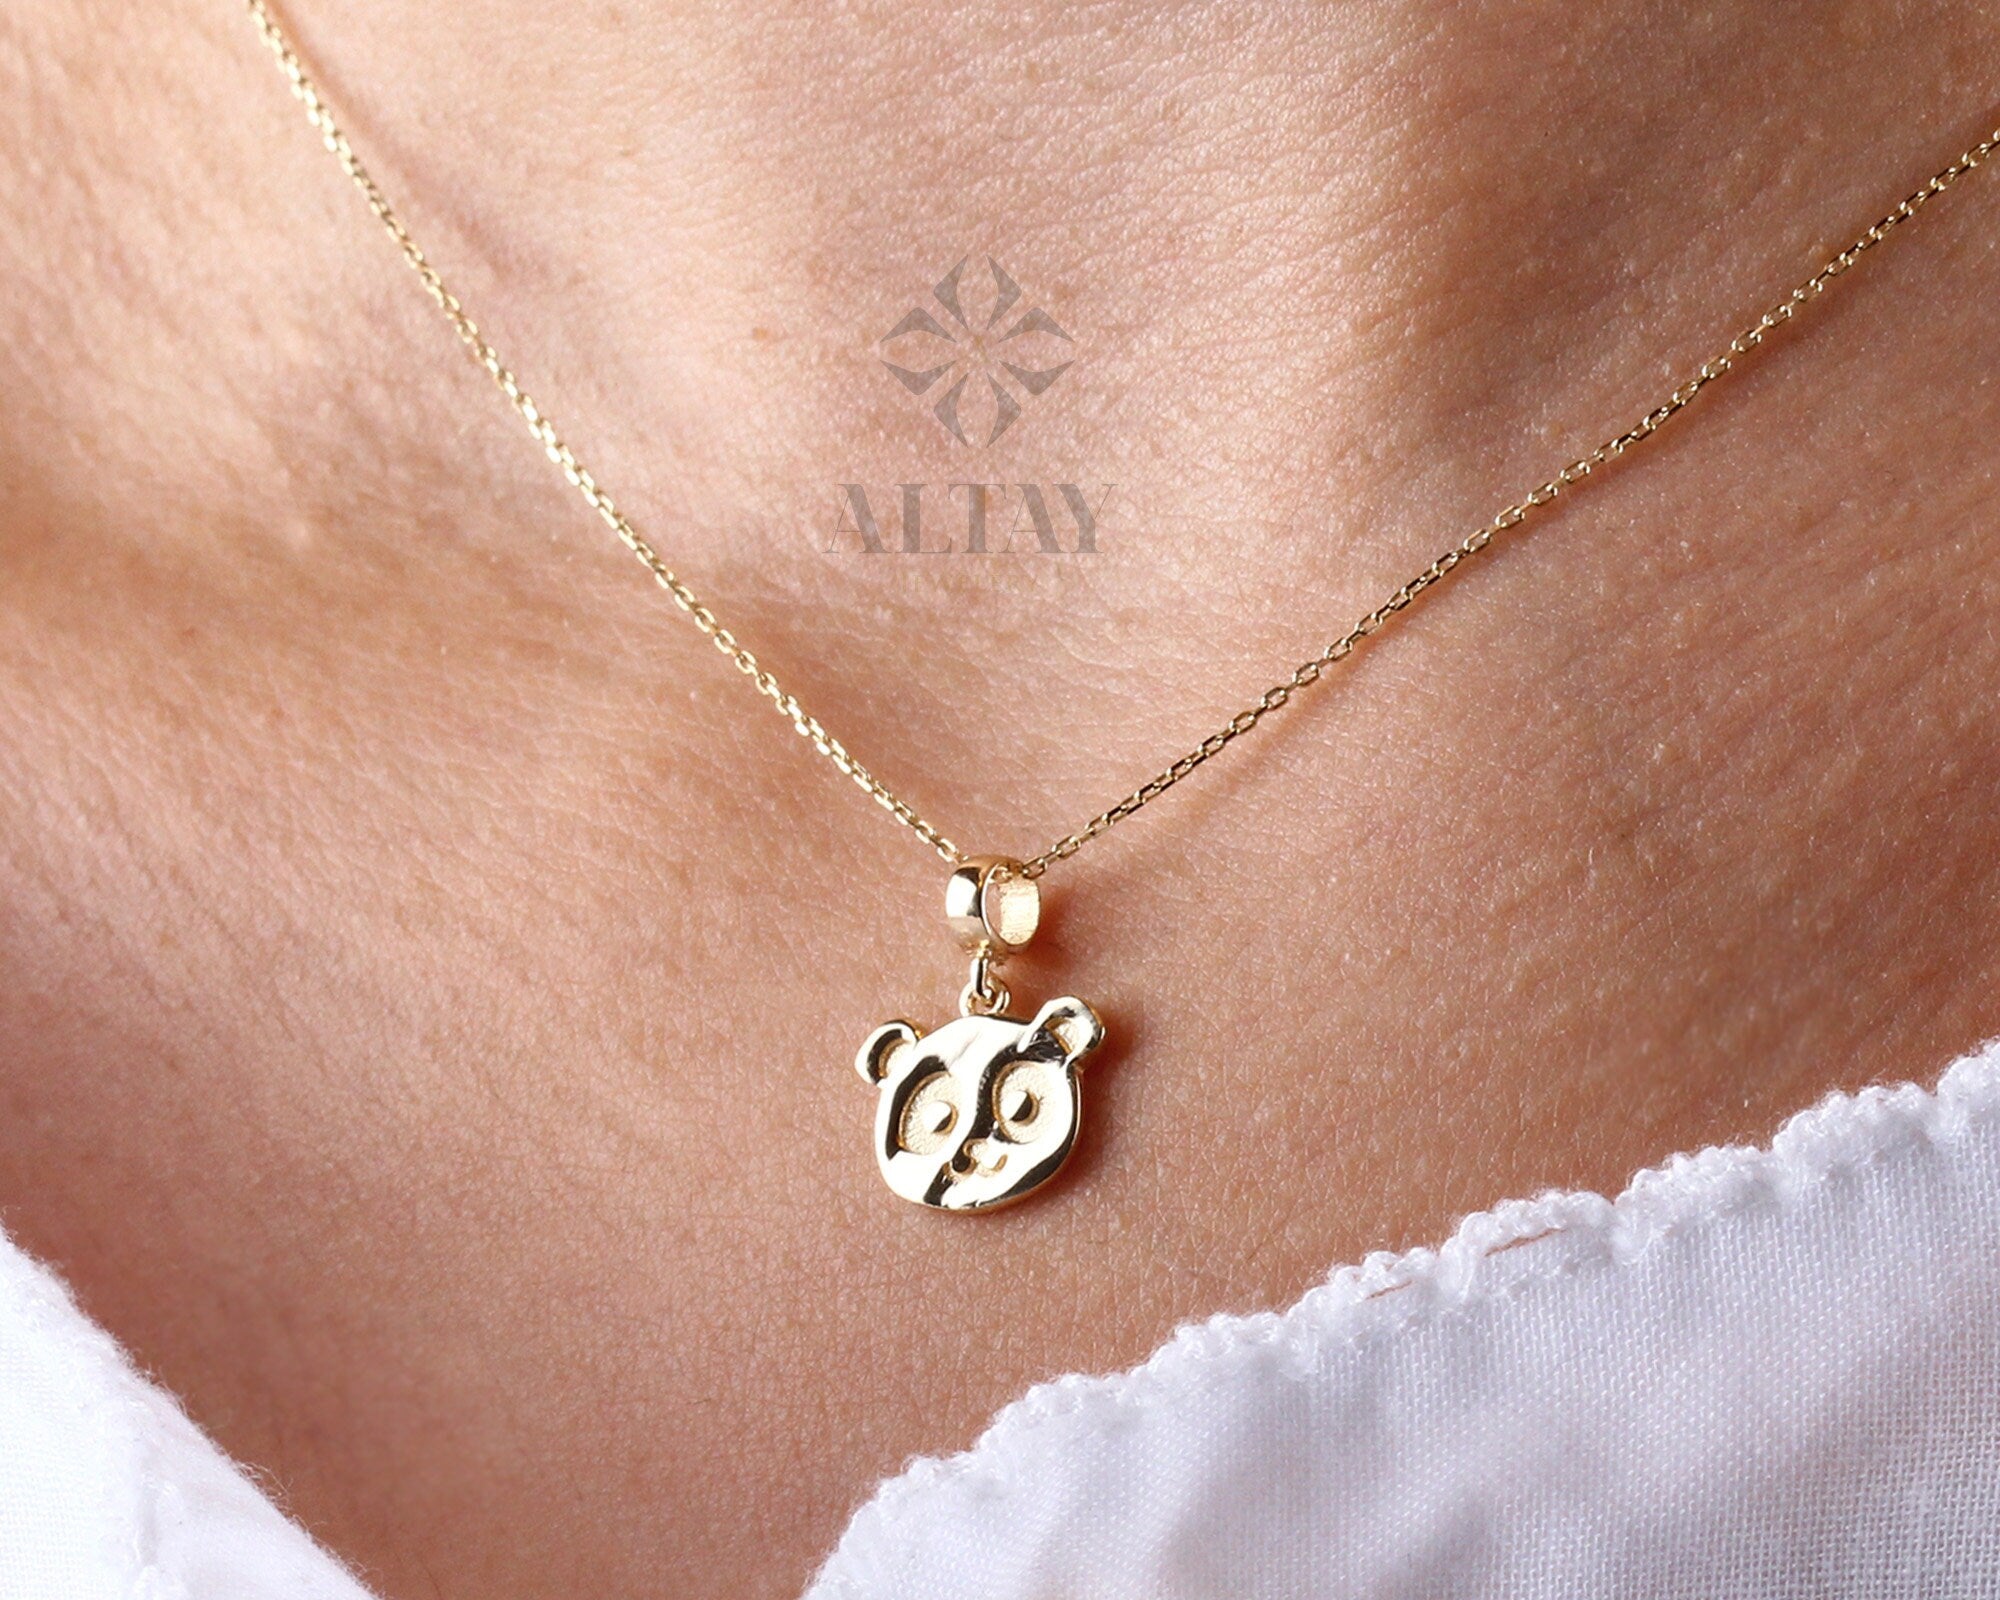 14K Gold Panda Necklace, Gold Panda Bear Pendant, Panda Face Design Choker, Animal Charm Jewelry, Unique Necklace, Luck Pendant Gift for Her